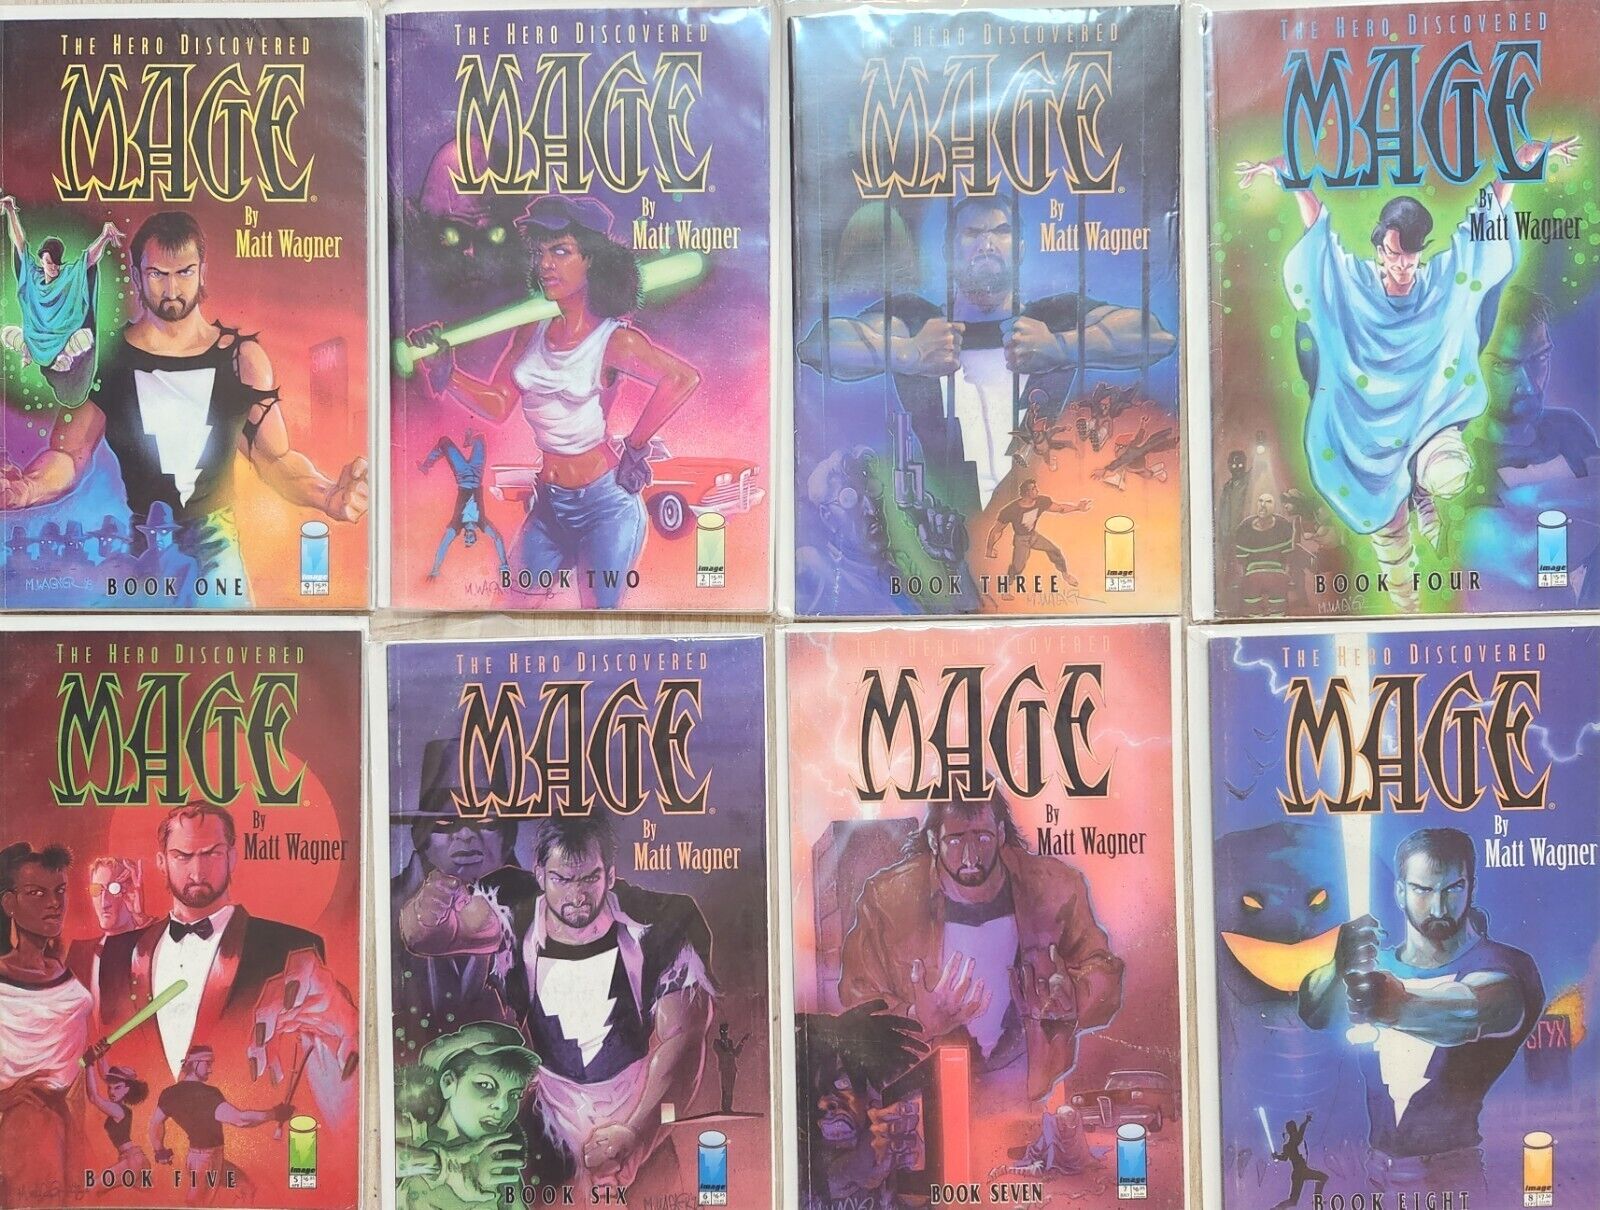 8 Volume Set MAGE HERO DISCOVERED COLLECTED EDITION BOOK IMAGE (PAPERBACK) 